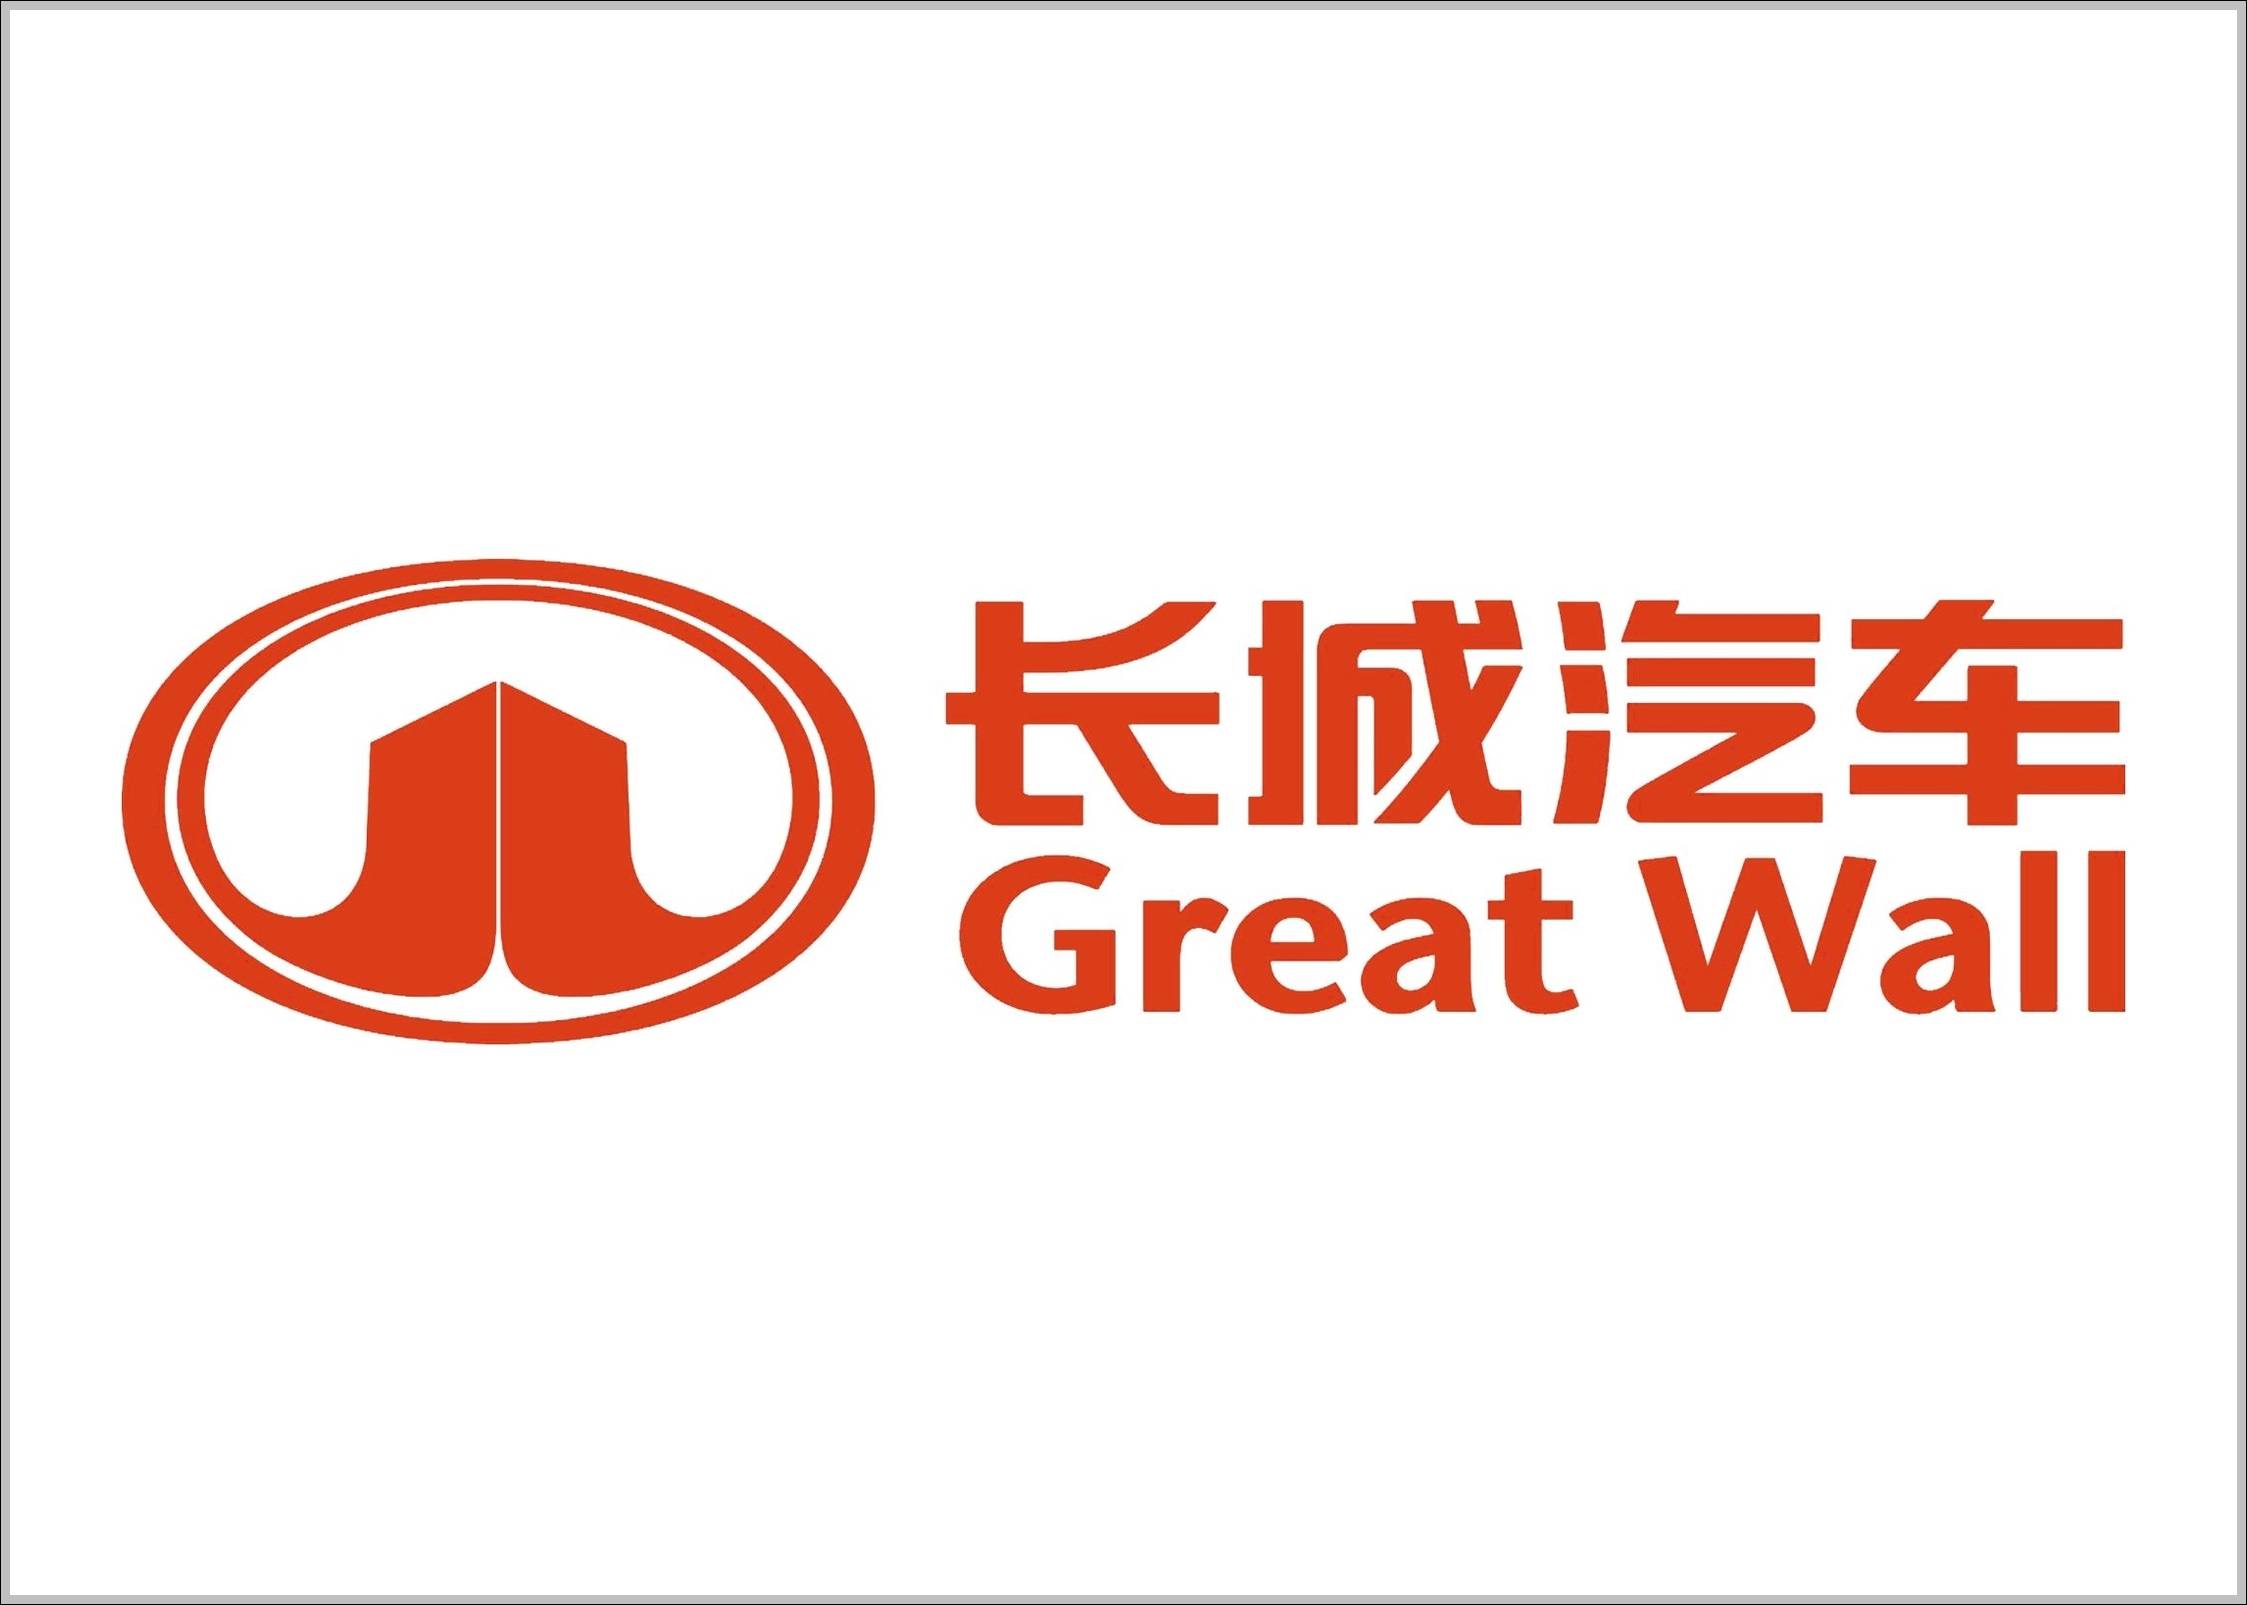 Great Wall logo red